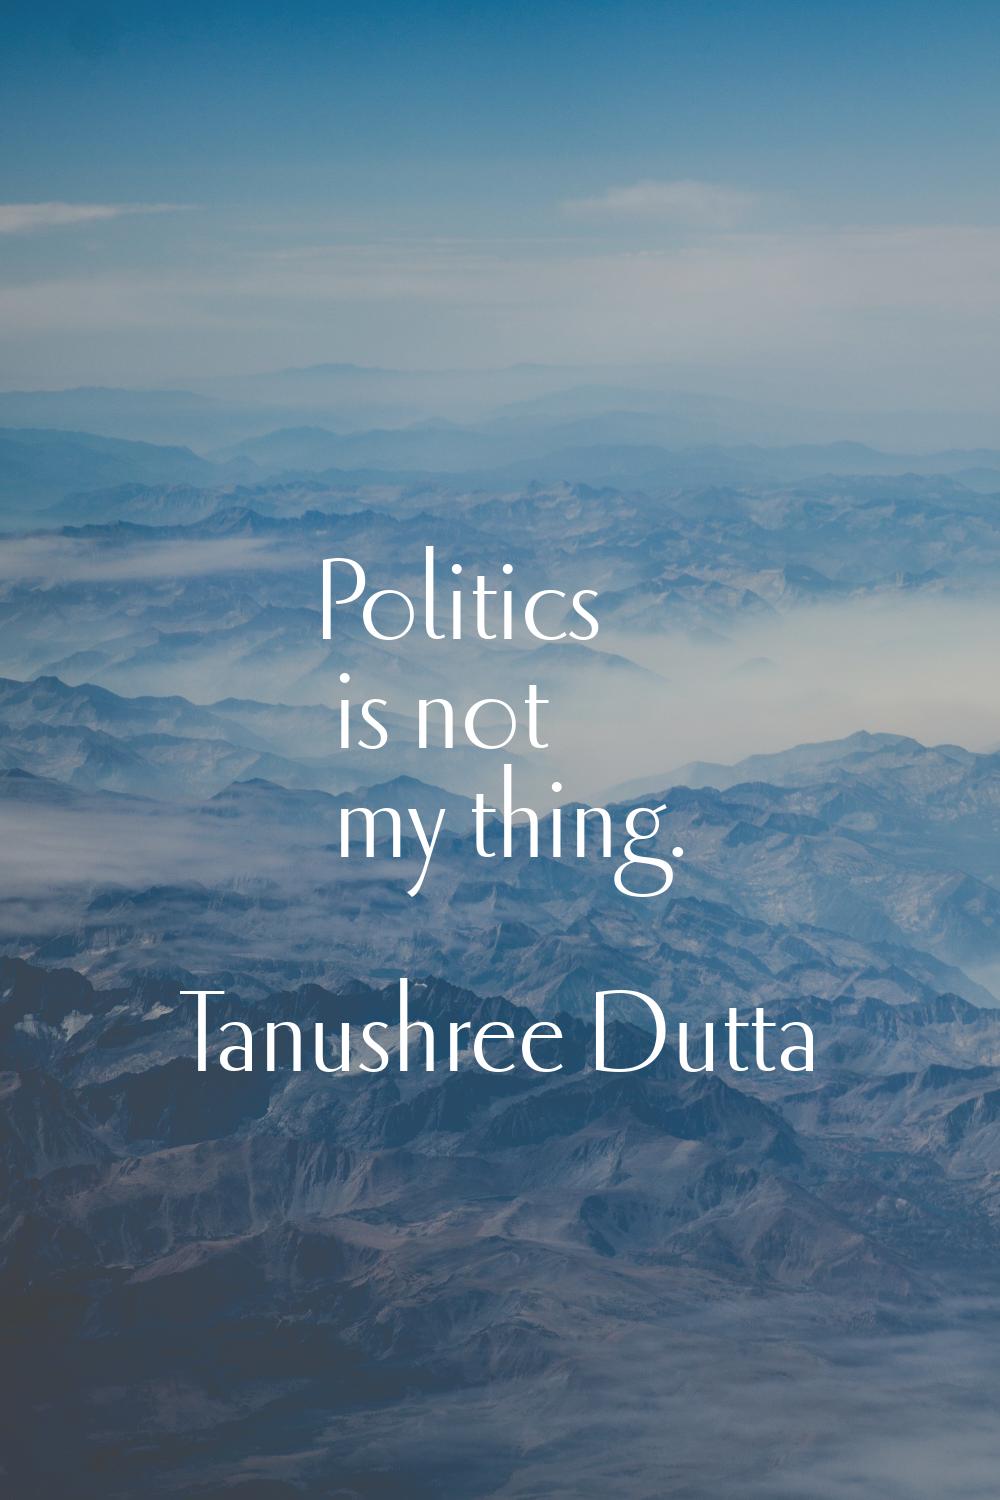 Politics is not my thing.